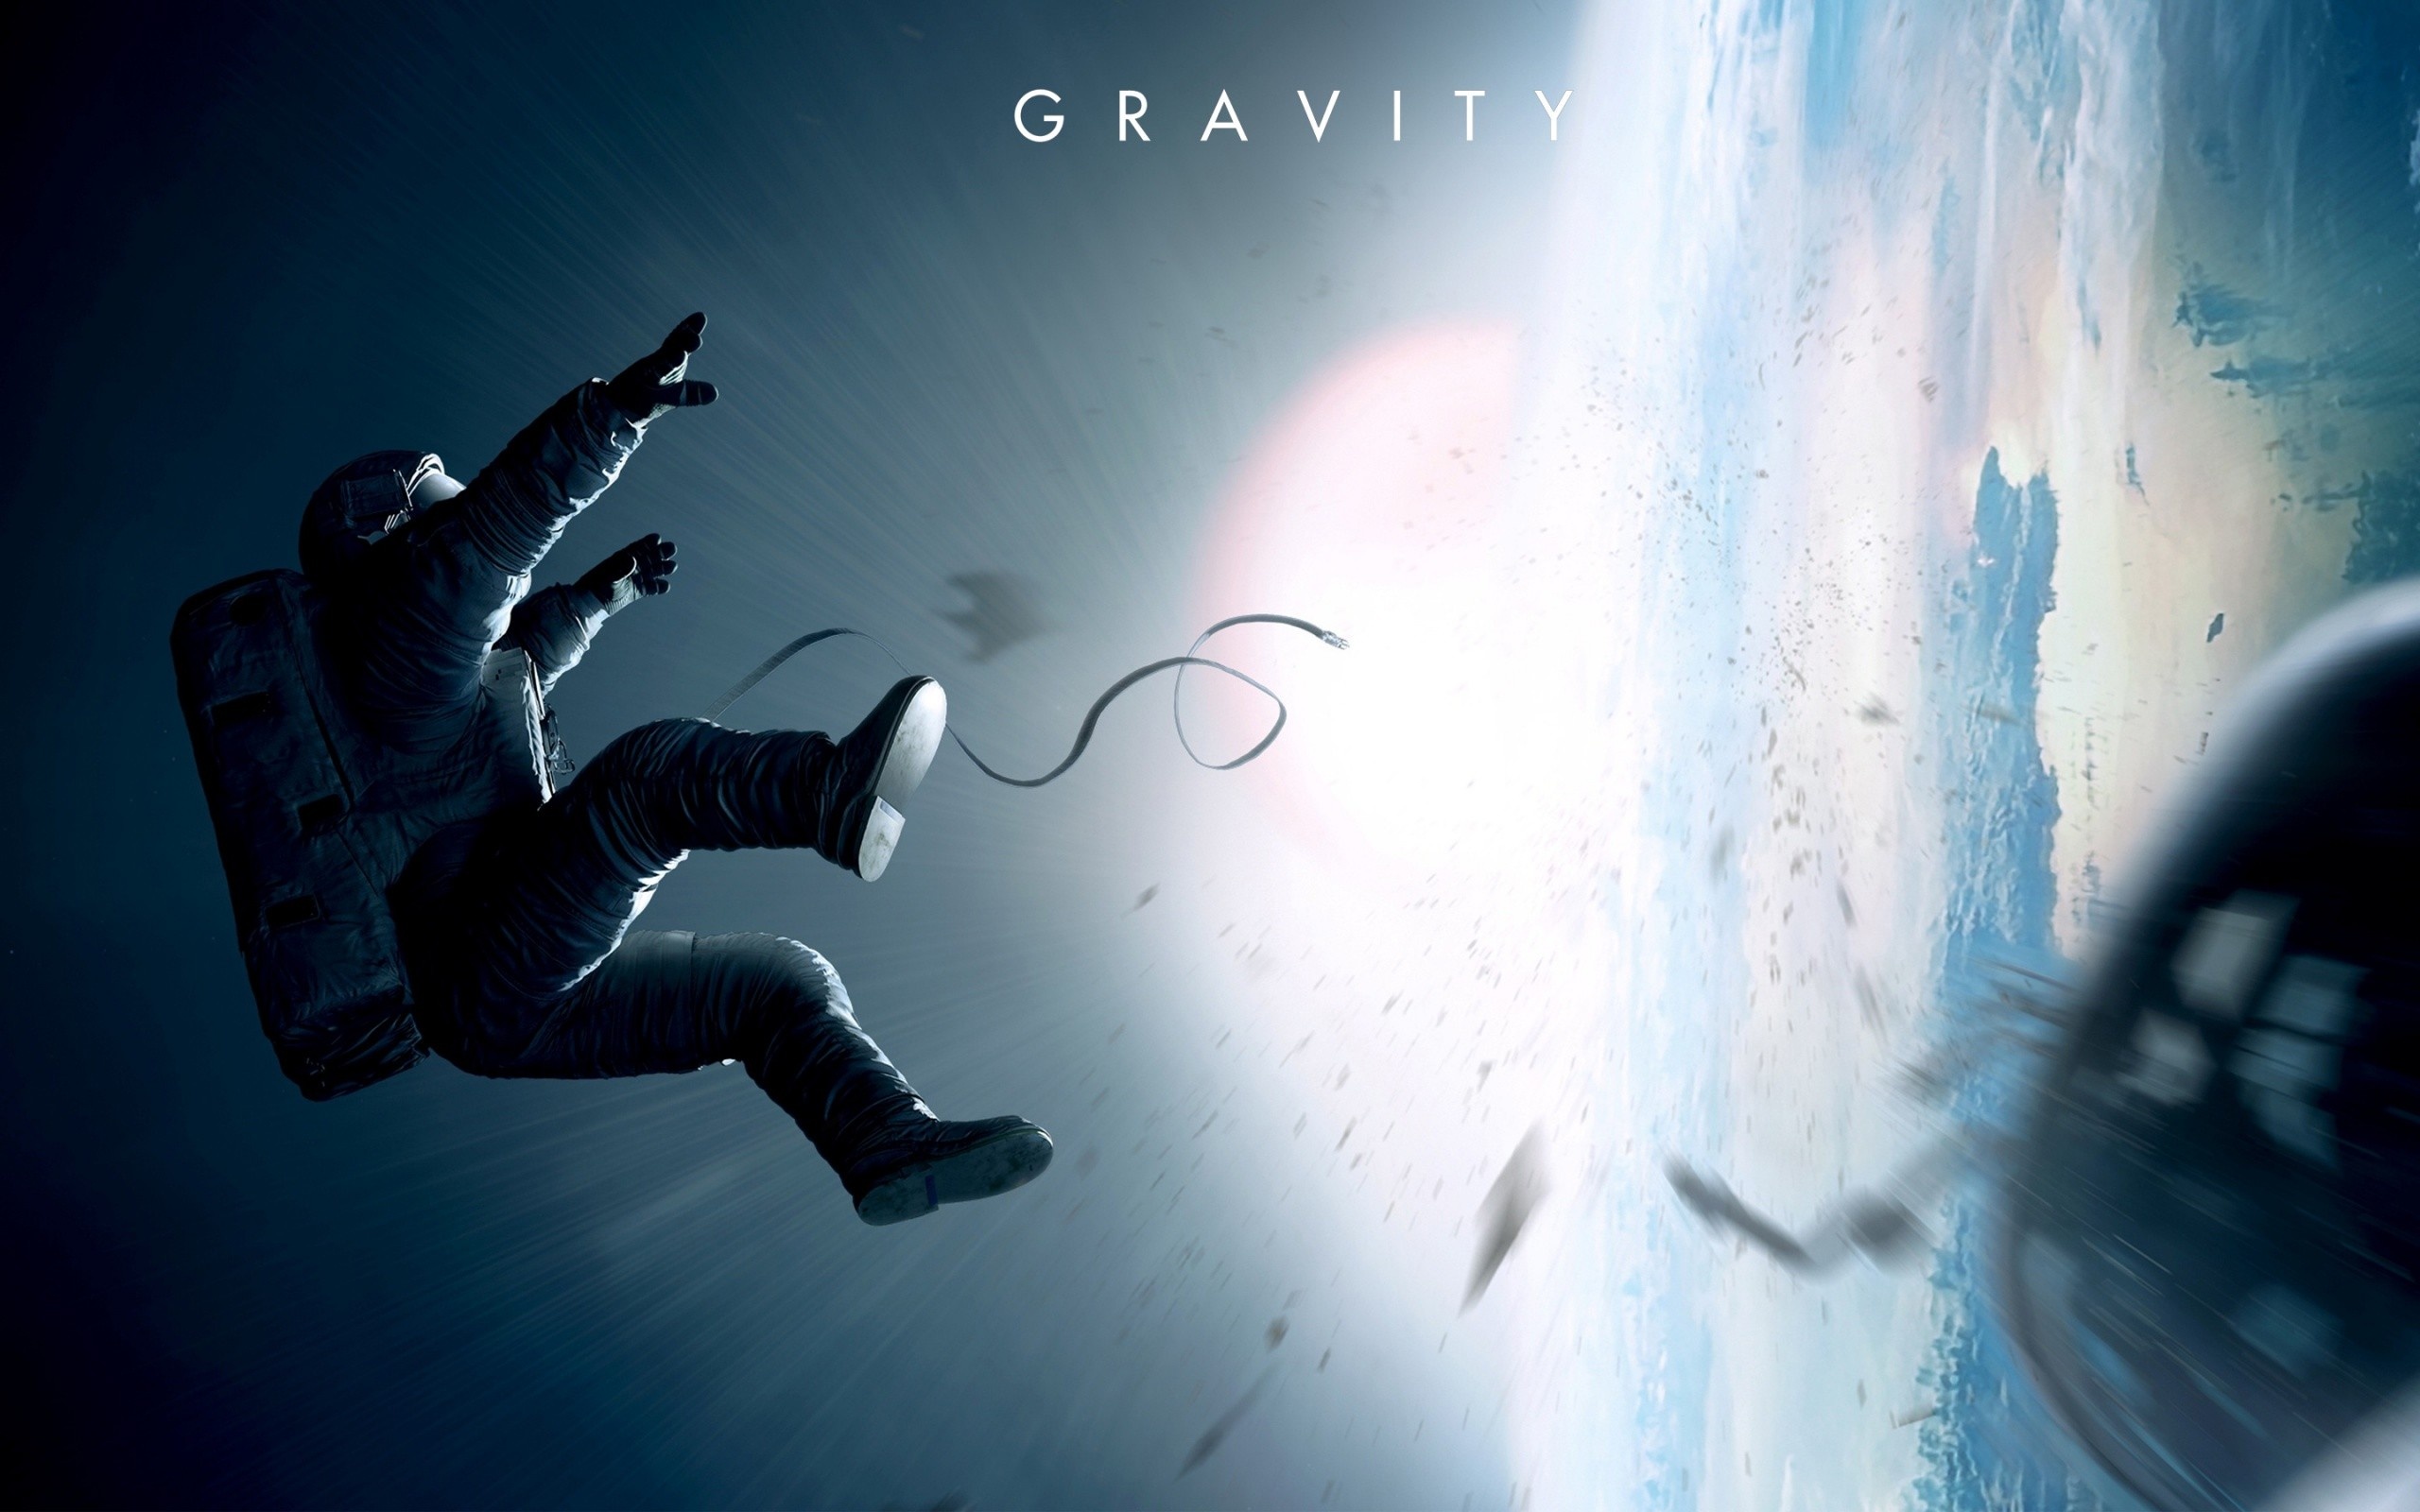 Gravity movie, Movie wallpapers, Acclaimed film, Gripping storyline, 2560x1600 HD Desktop